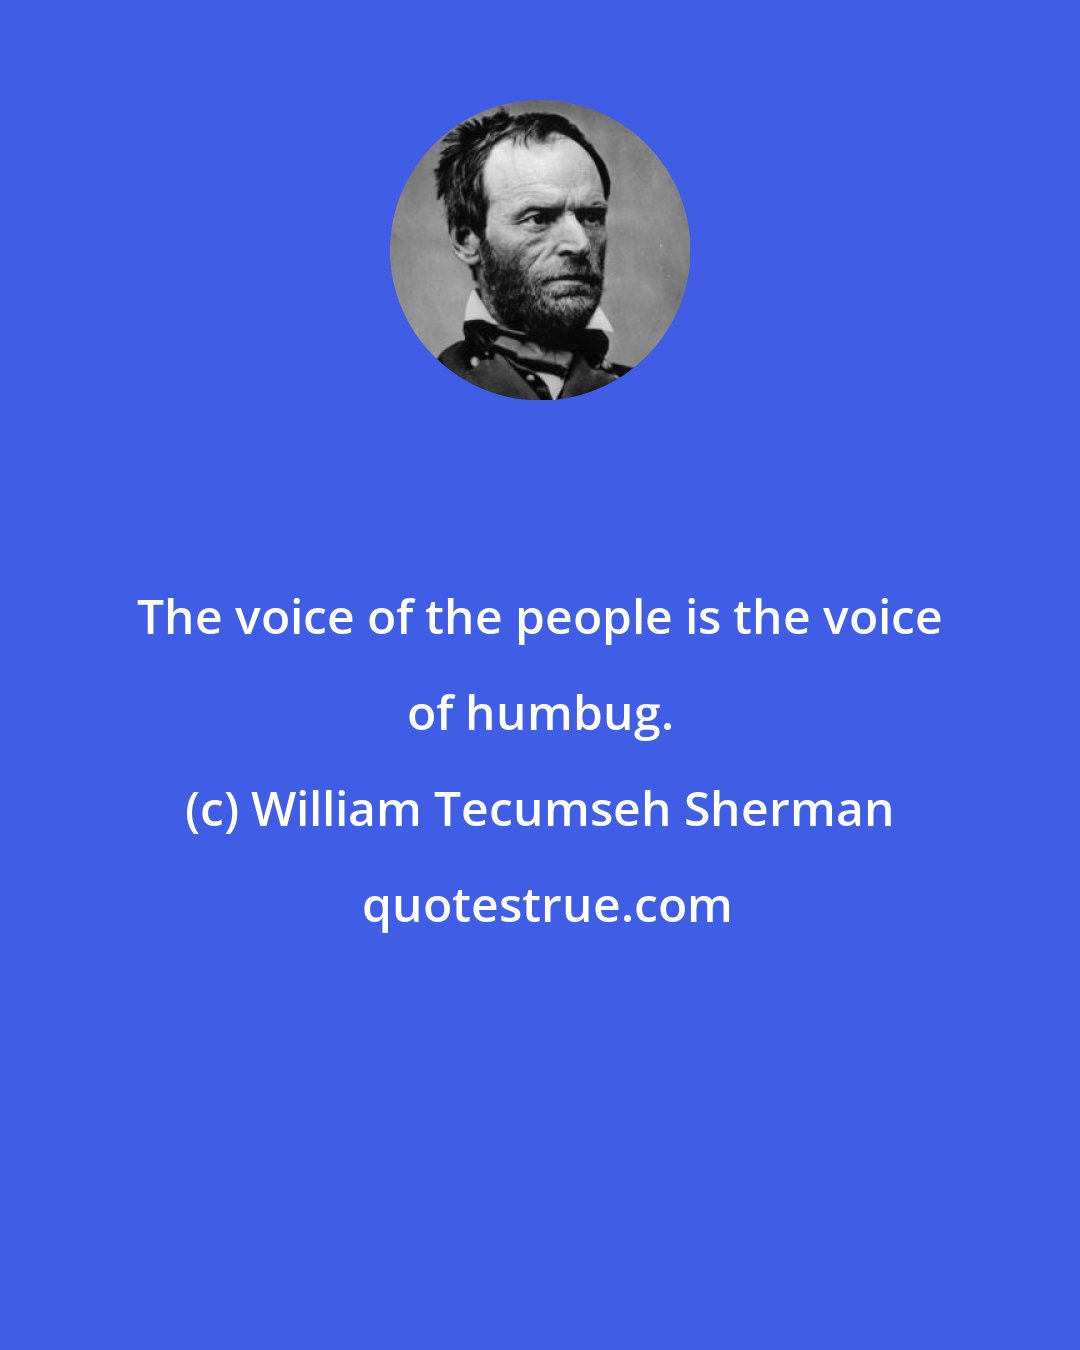 William Tecumseh Sherman: The voice of the people is the voice of humbug.